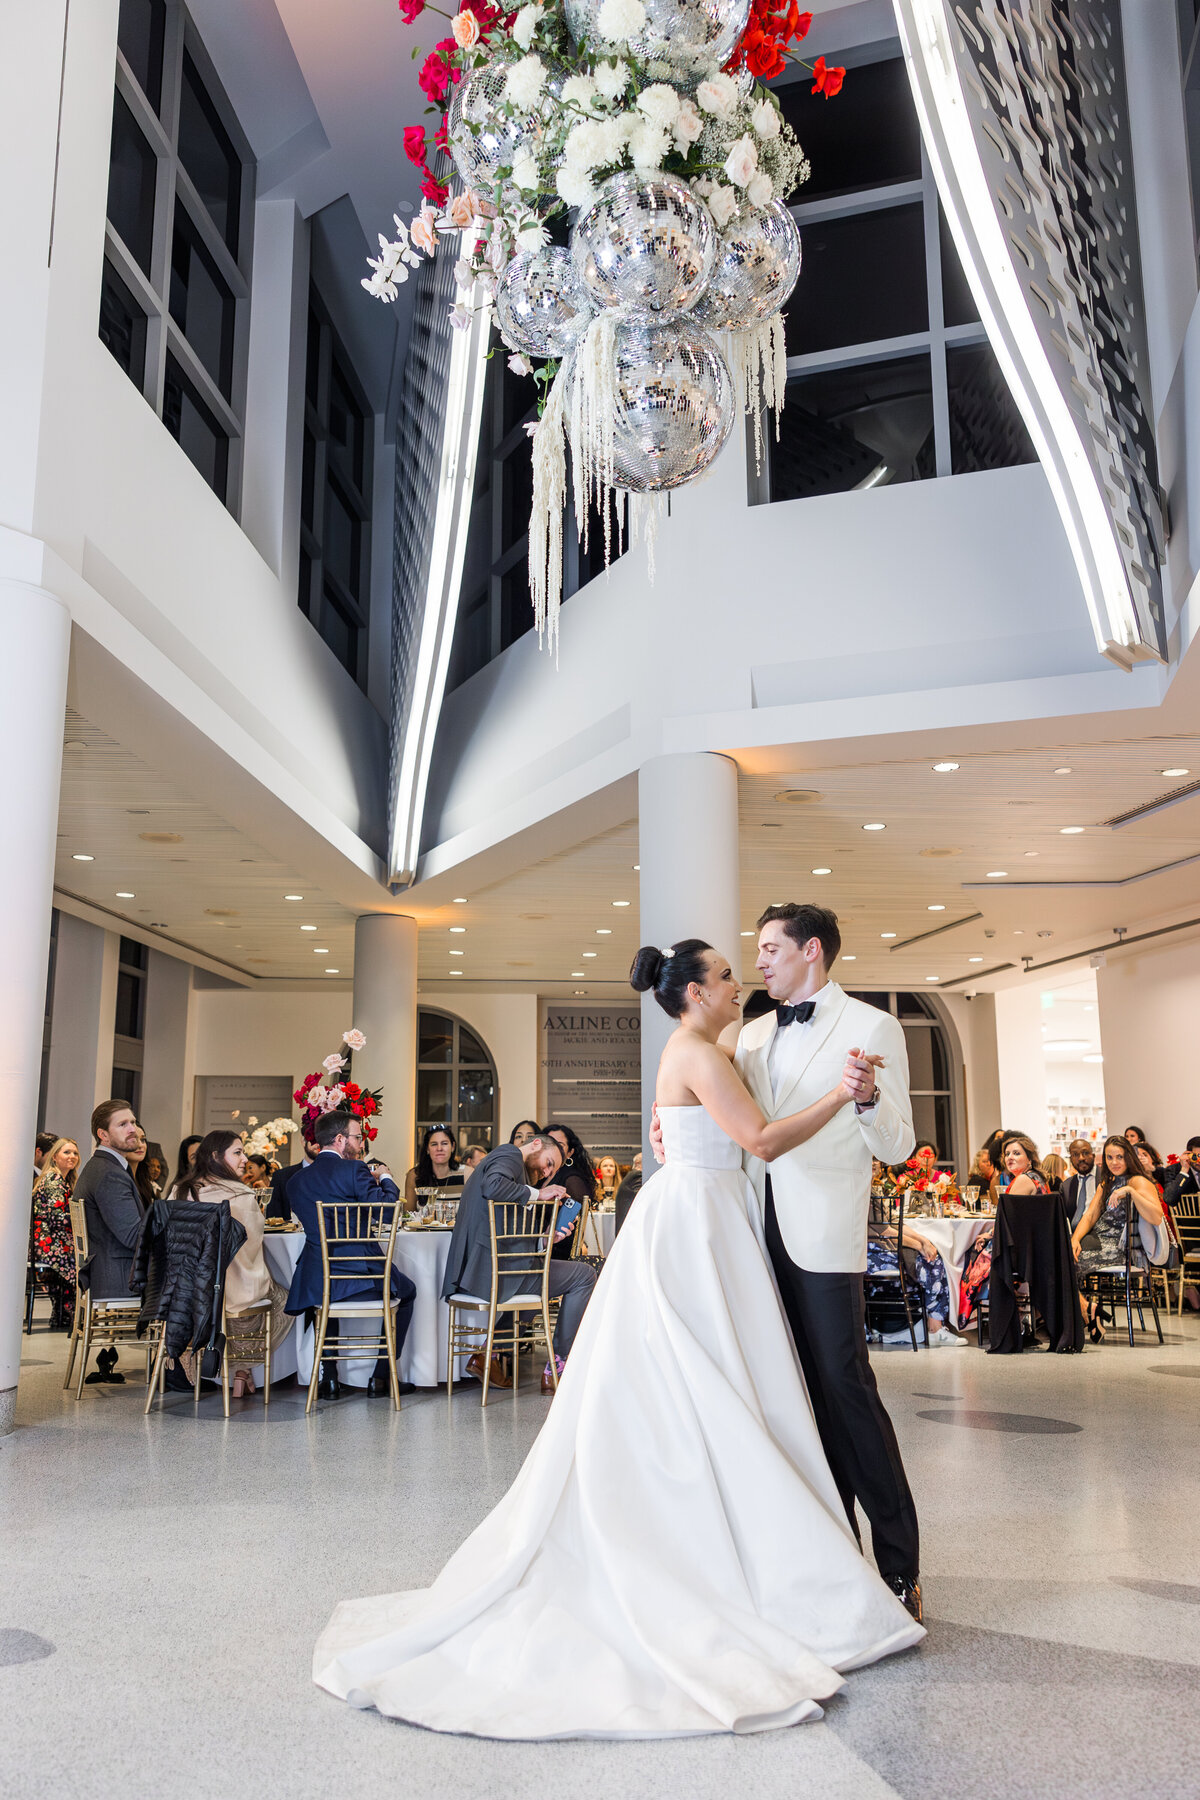 bride-and-groom-first-dance-under-disco-ball